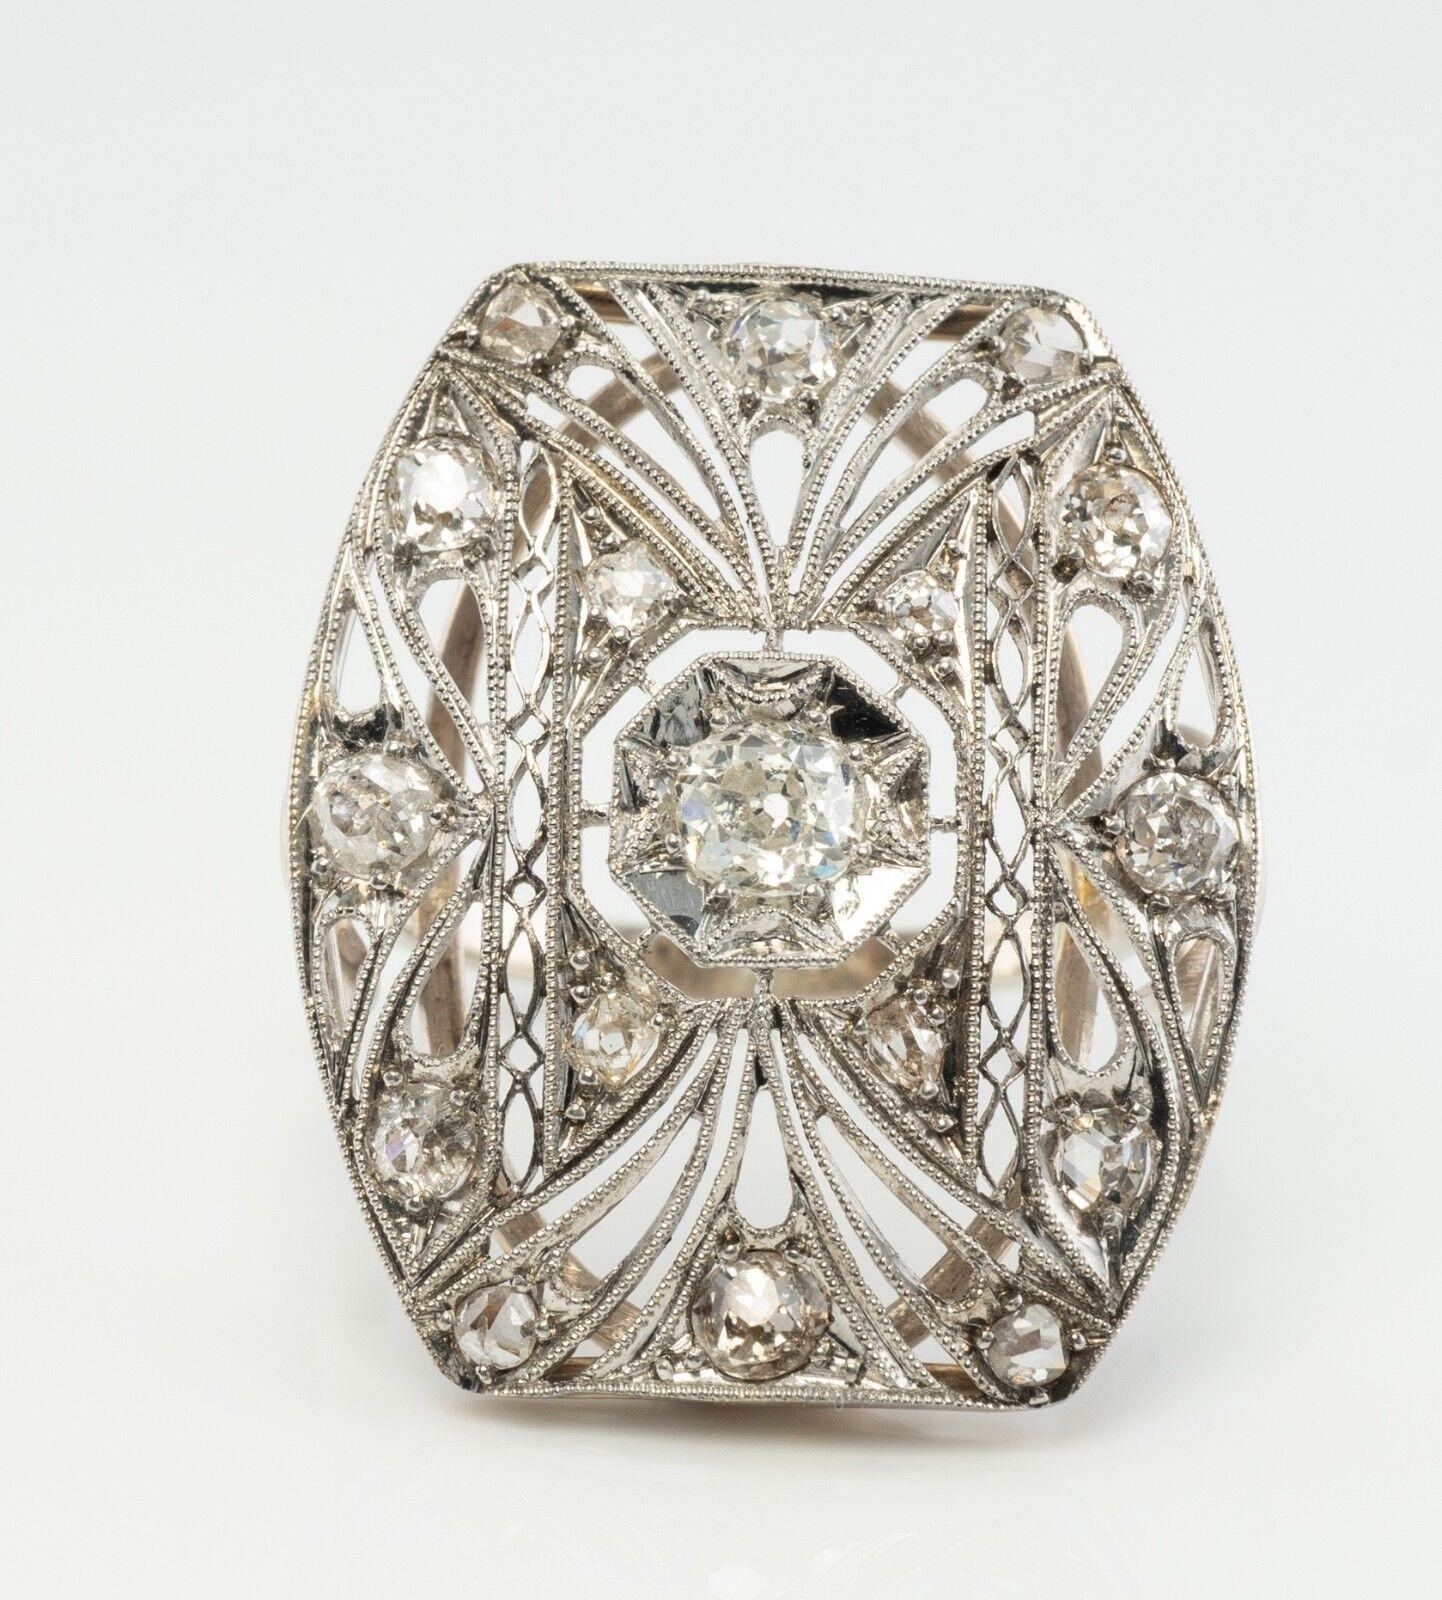 This antique ring circa the 1910s is finely crafted in solid 14K gold for the shank and Platinum for the top (carefully tested and guaranteed). Seventeen old miner cut diamonds are set with gorgeous milgrained mounting. The center diamond is .10